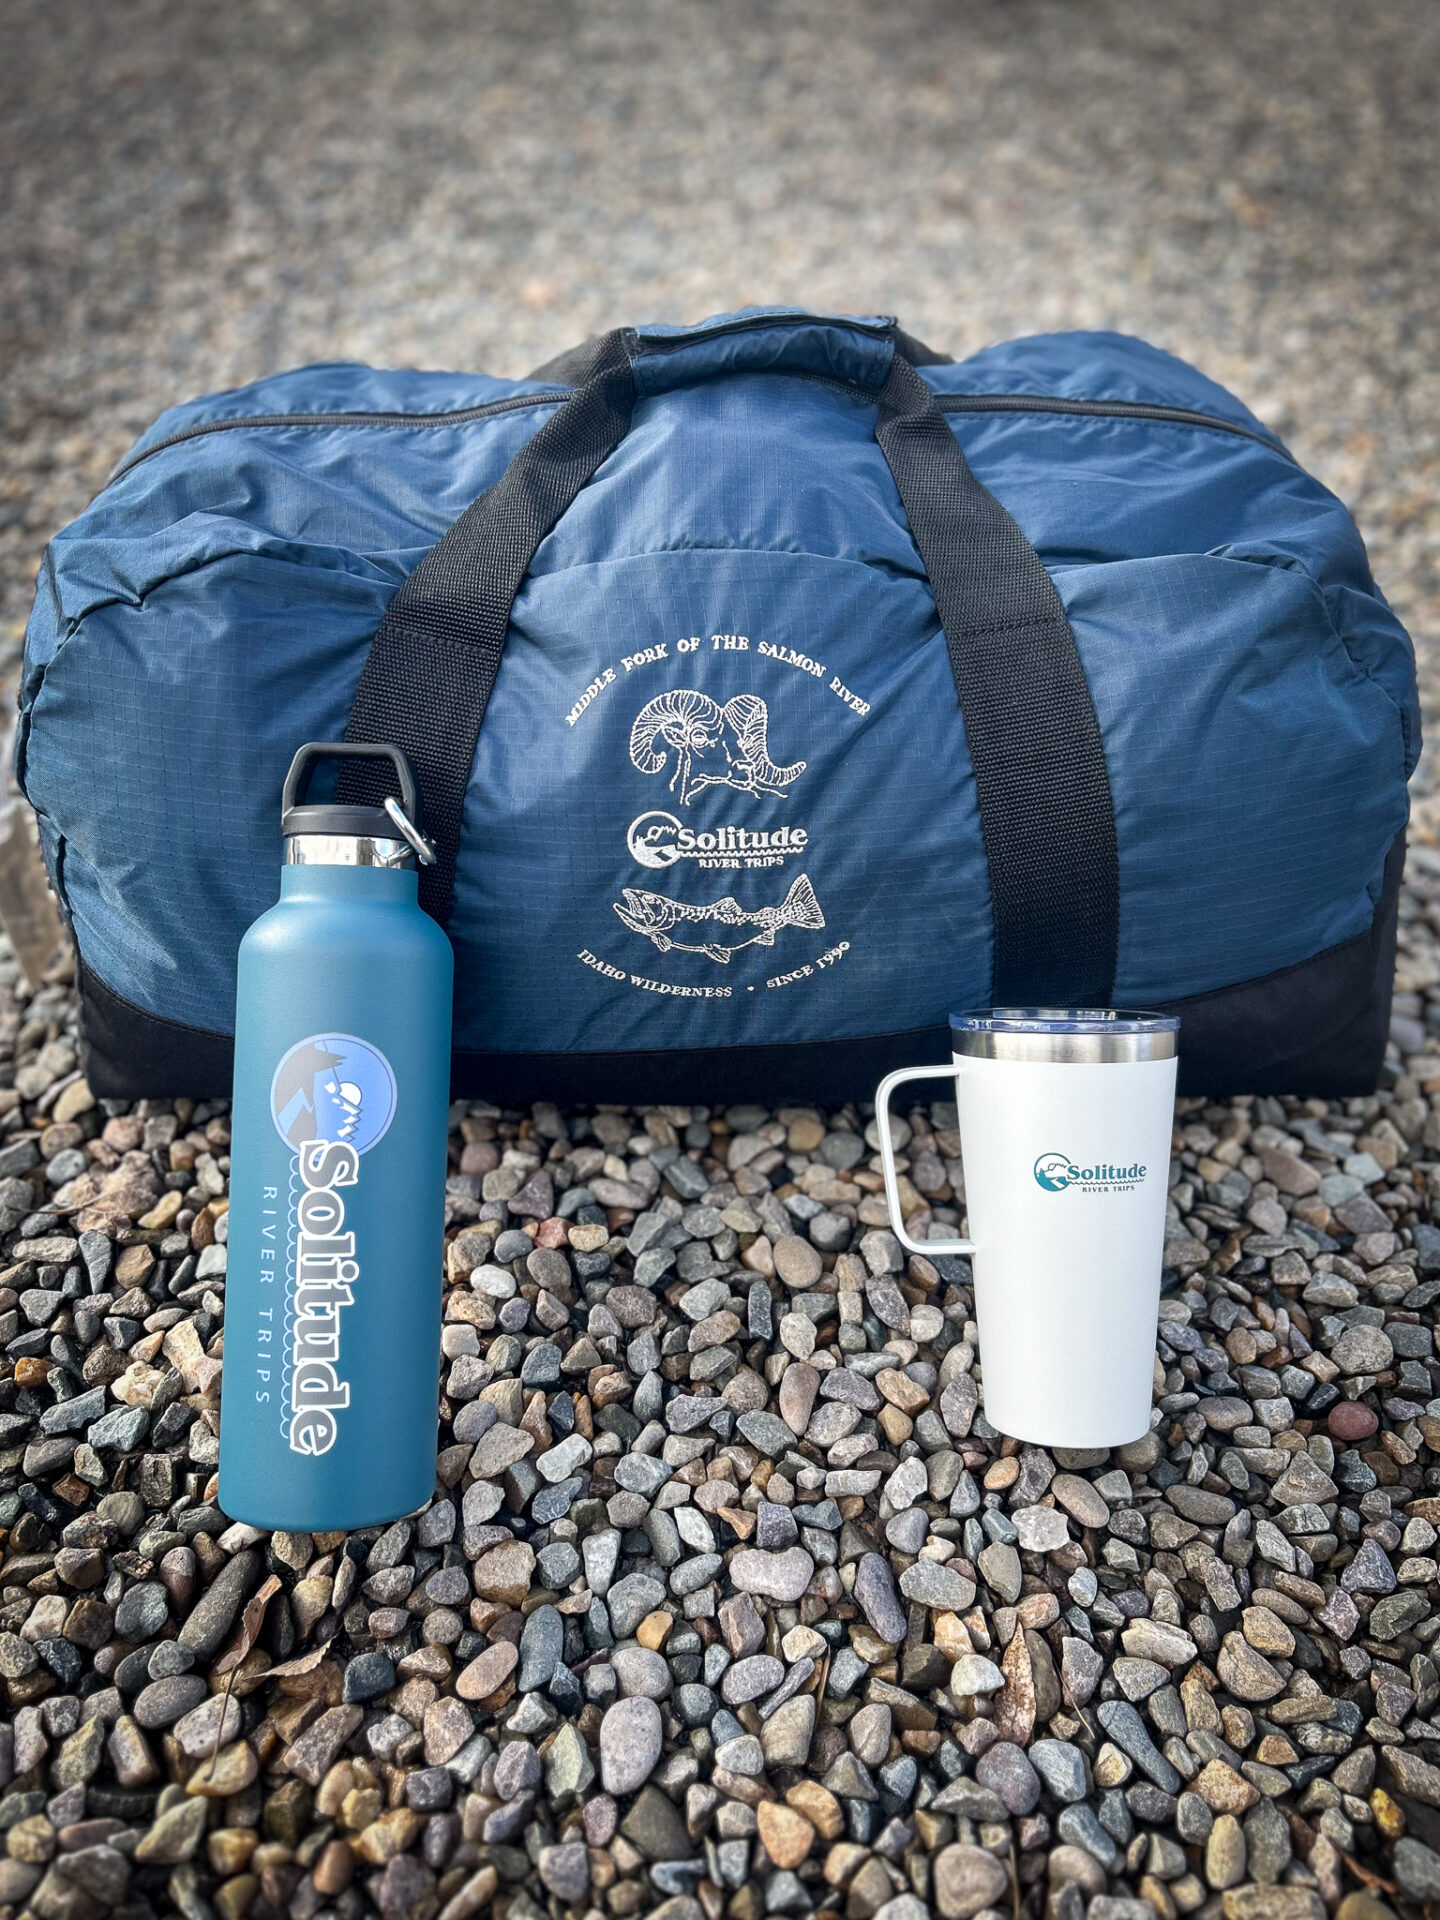 the duffel bag, water bottle and coffee mug solitude river trips provides to each of their guests.